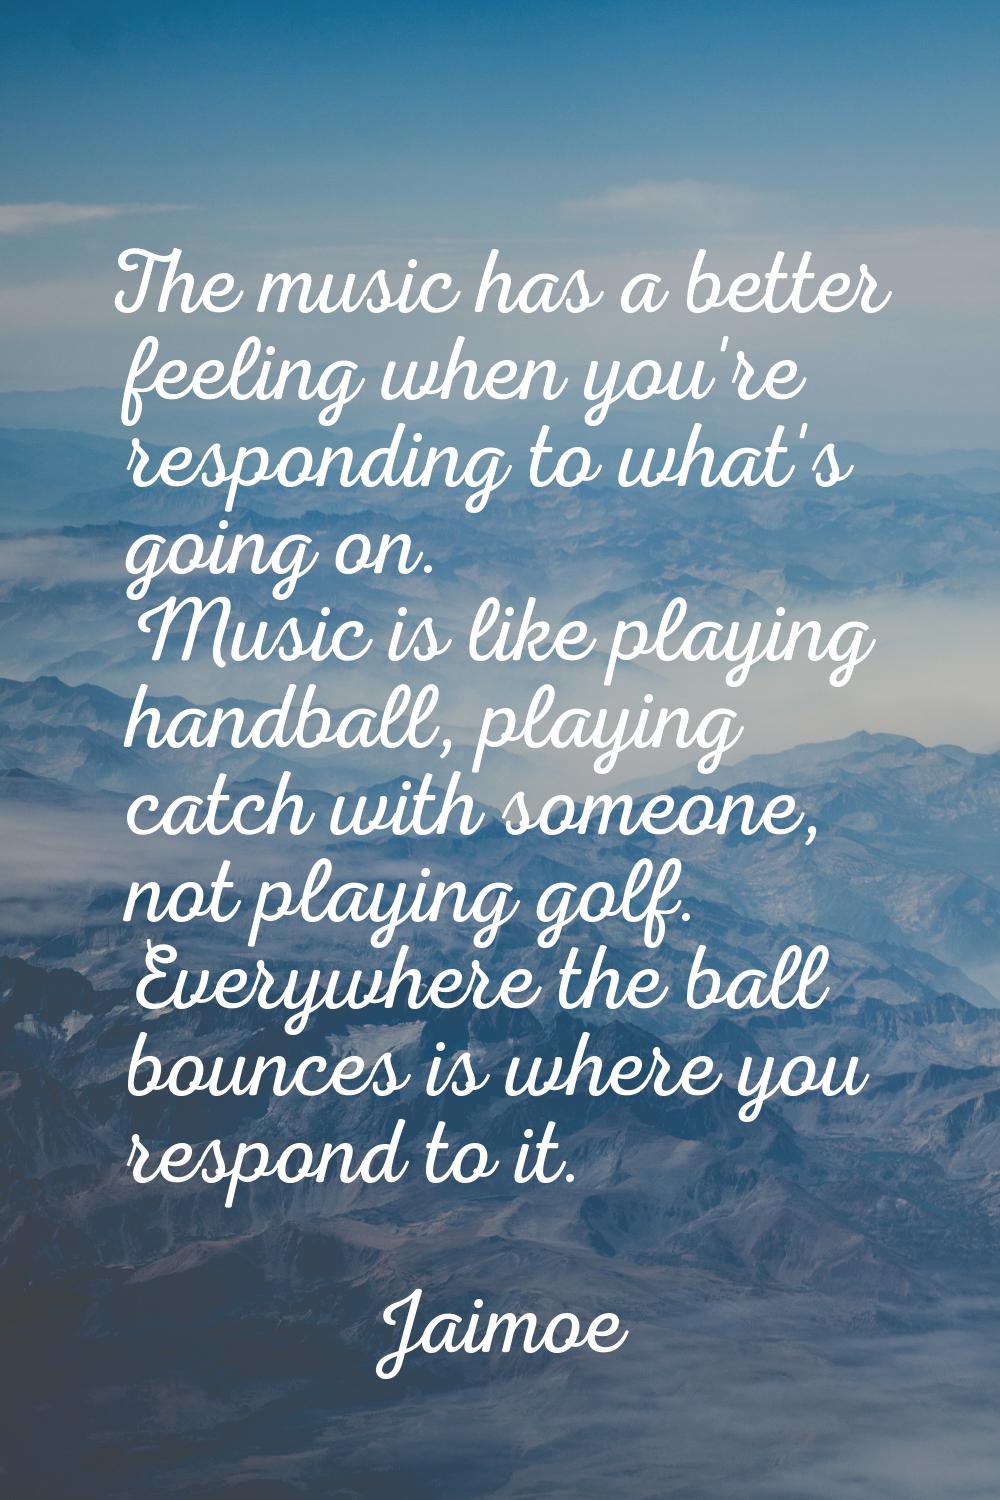 The music has a better feeling when you're responding to what's going on. Music is like playing han